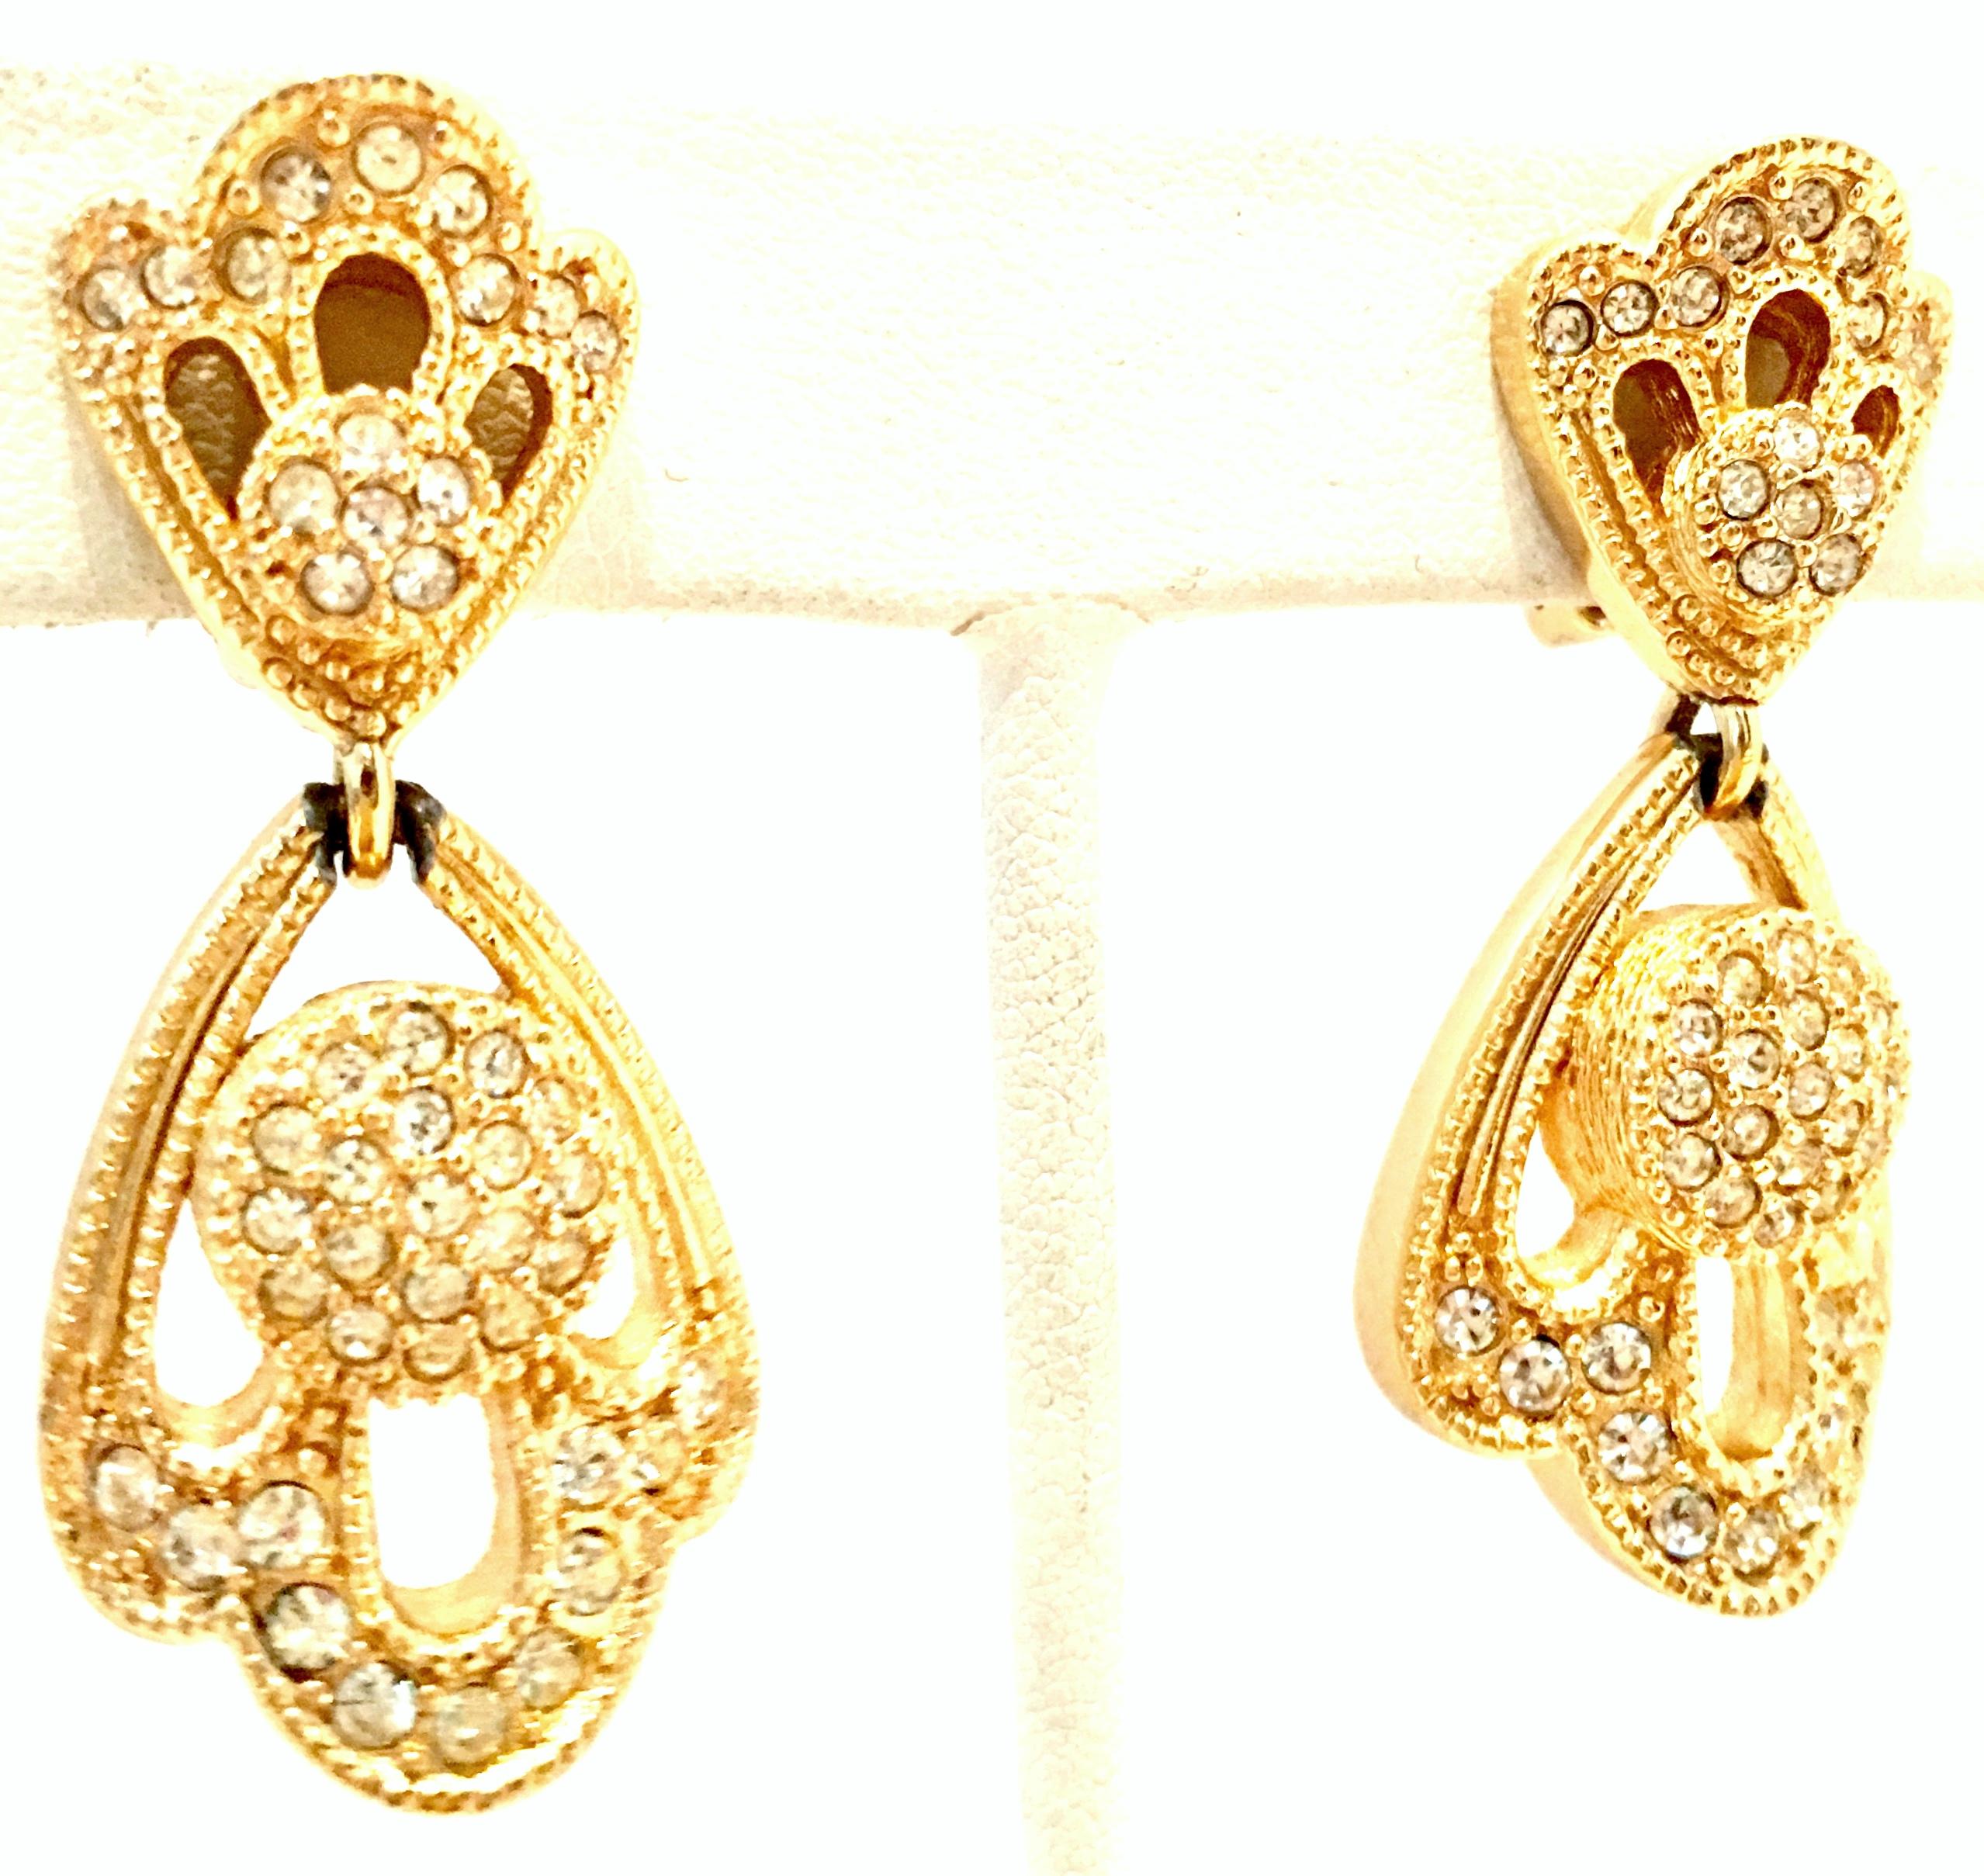 20th Century Christian Dior Pair Of Gold Plate & Austrian Crystal Dimensional Drop Earrings. These finely crafted Christian Dior clip style dangle earrings feature brilliant cut and faceted colorless pave set Austrian crystal stones. Signed on the